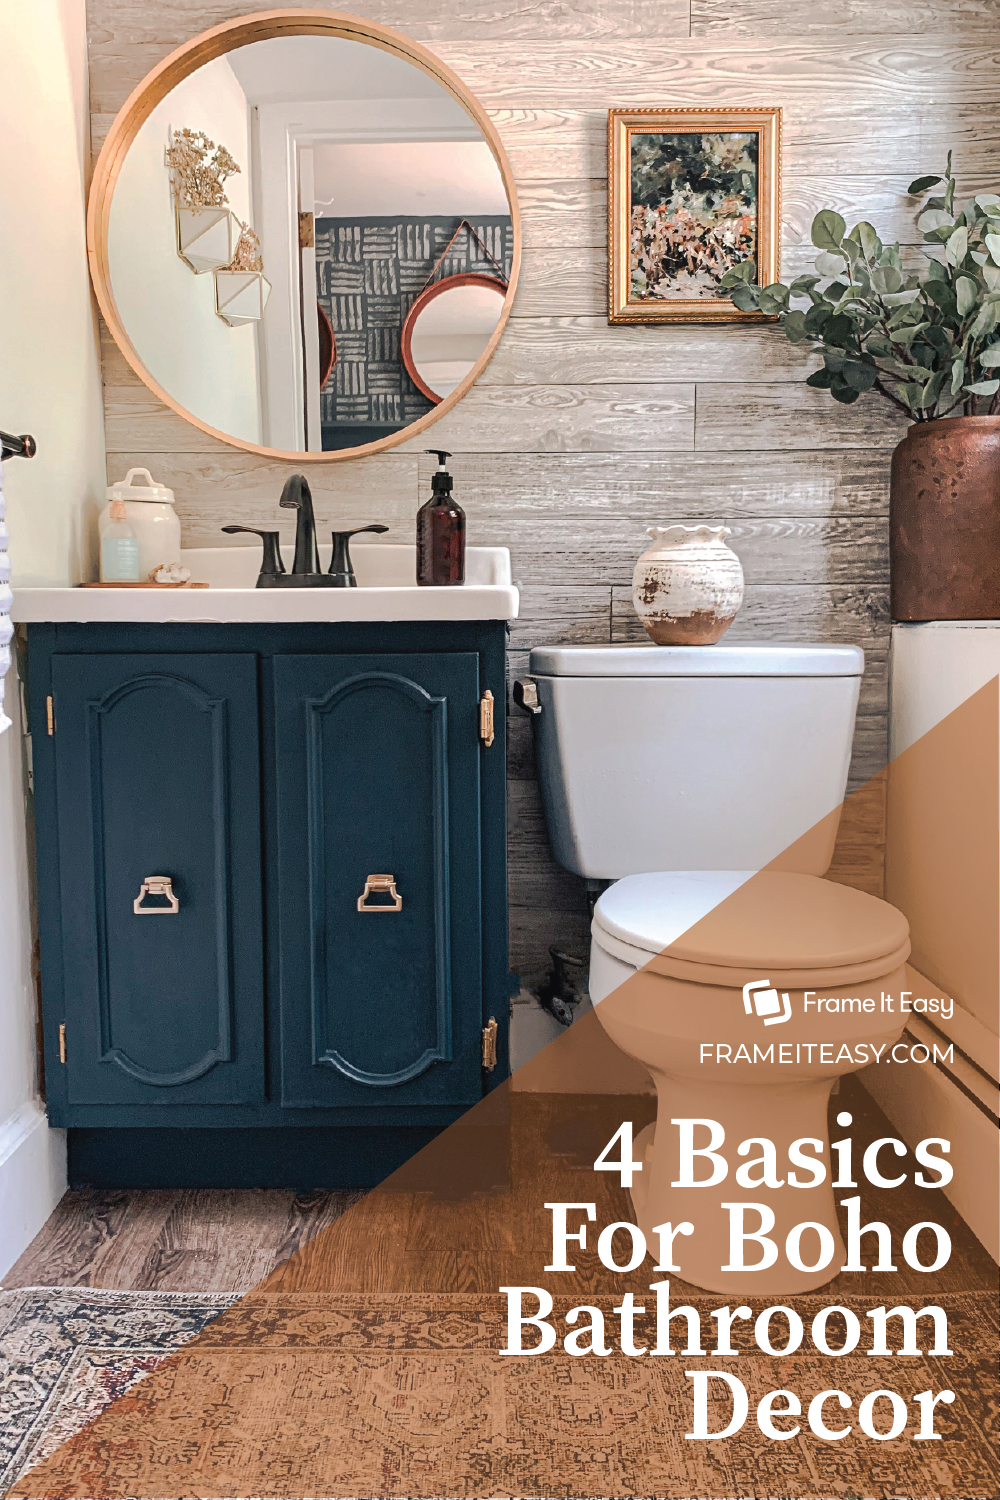 4 Basics for Boho Bathroom Decor- A bathroom that's layering with multiple textures and patterns within the wall, rug and artwork. There are neutral, worn colors with also pops of bright colors as well as a plant to add some greenery!